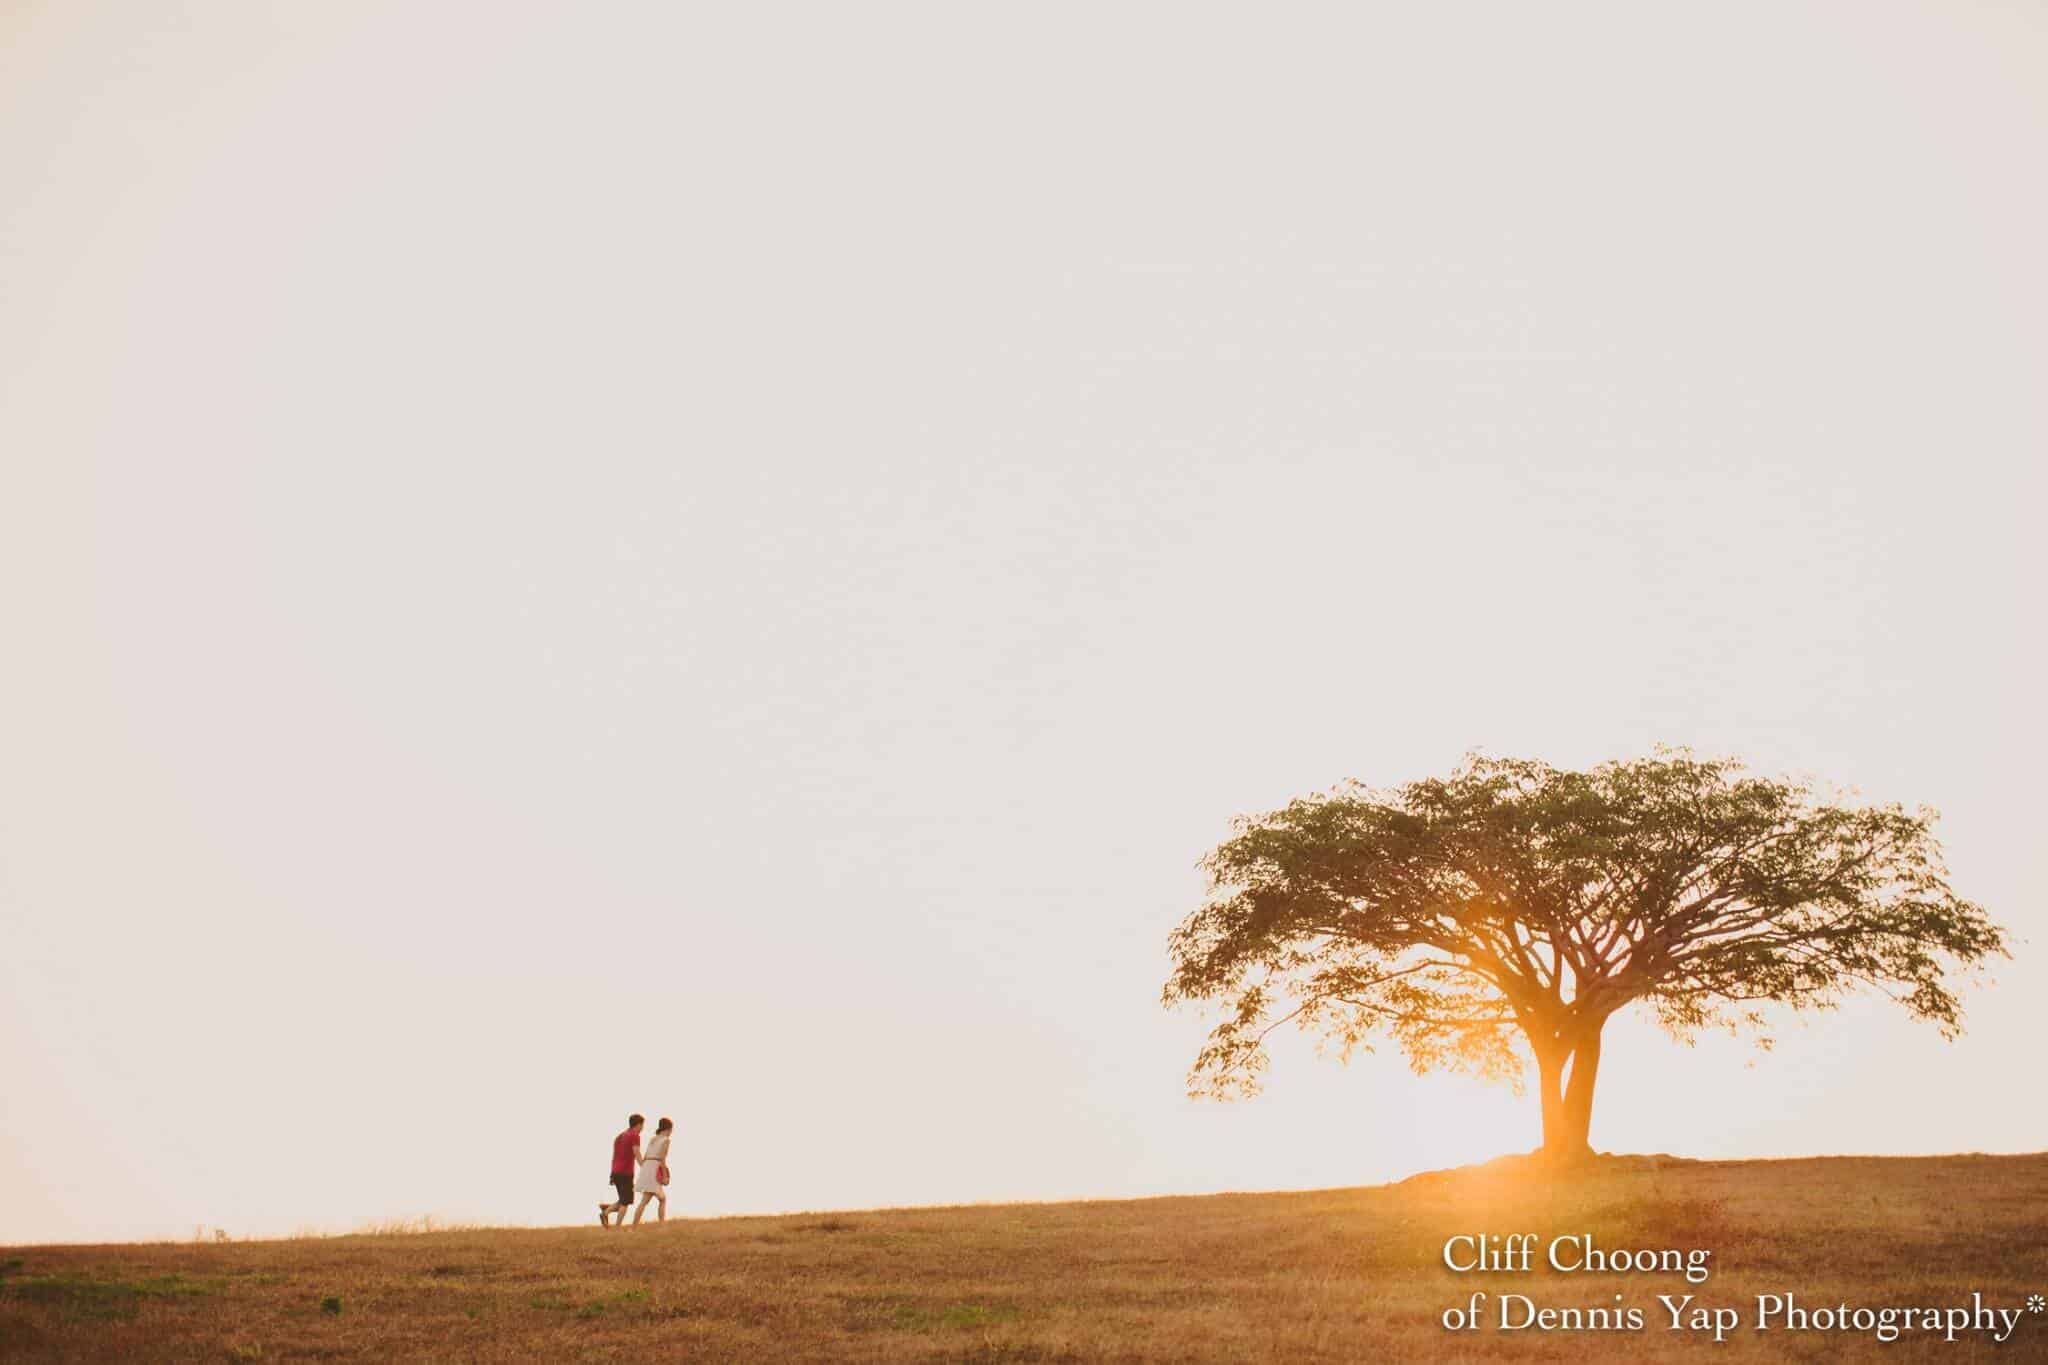 beloved engagement pre-wedding malaysia photographer Cliff Choong of Dennis Yap Photography love UPM Kuala Lumpur on the hill tree